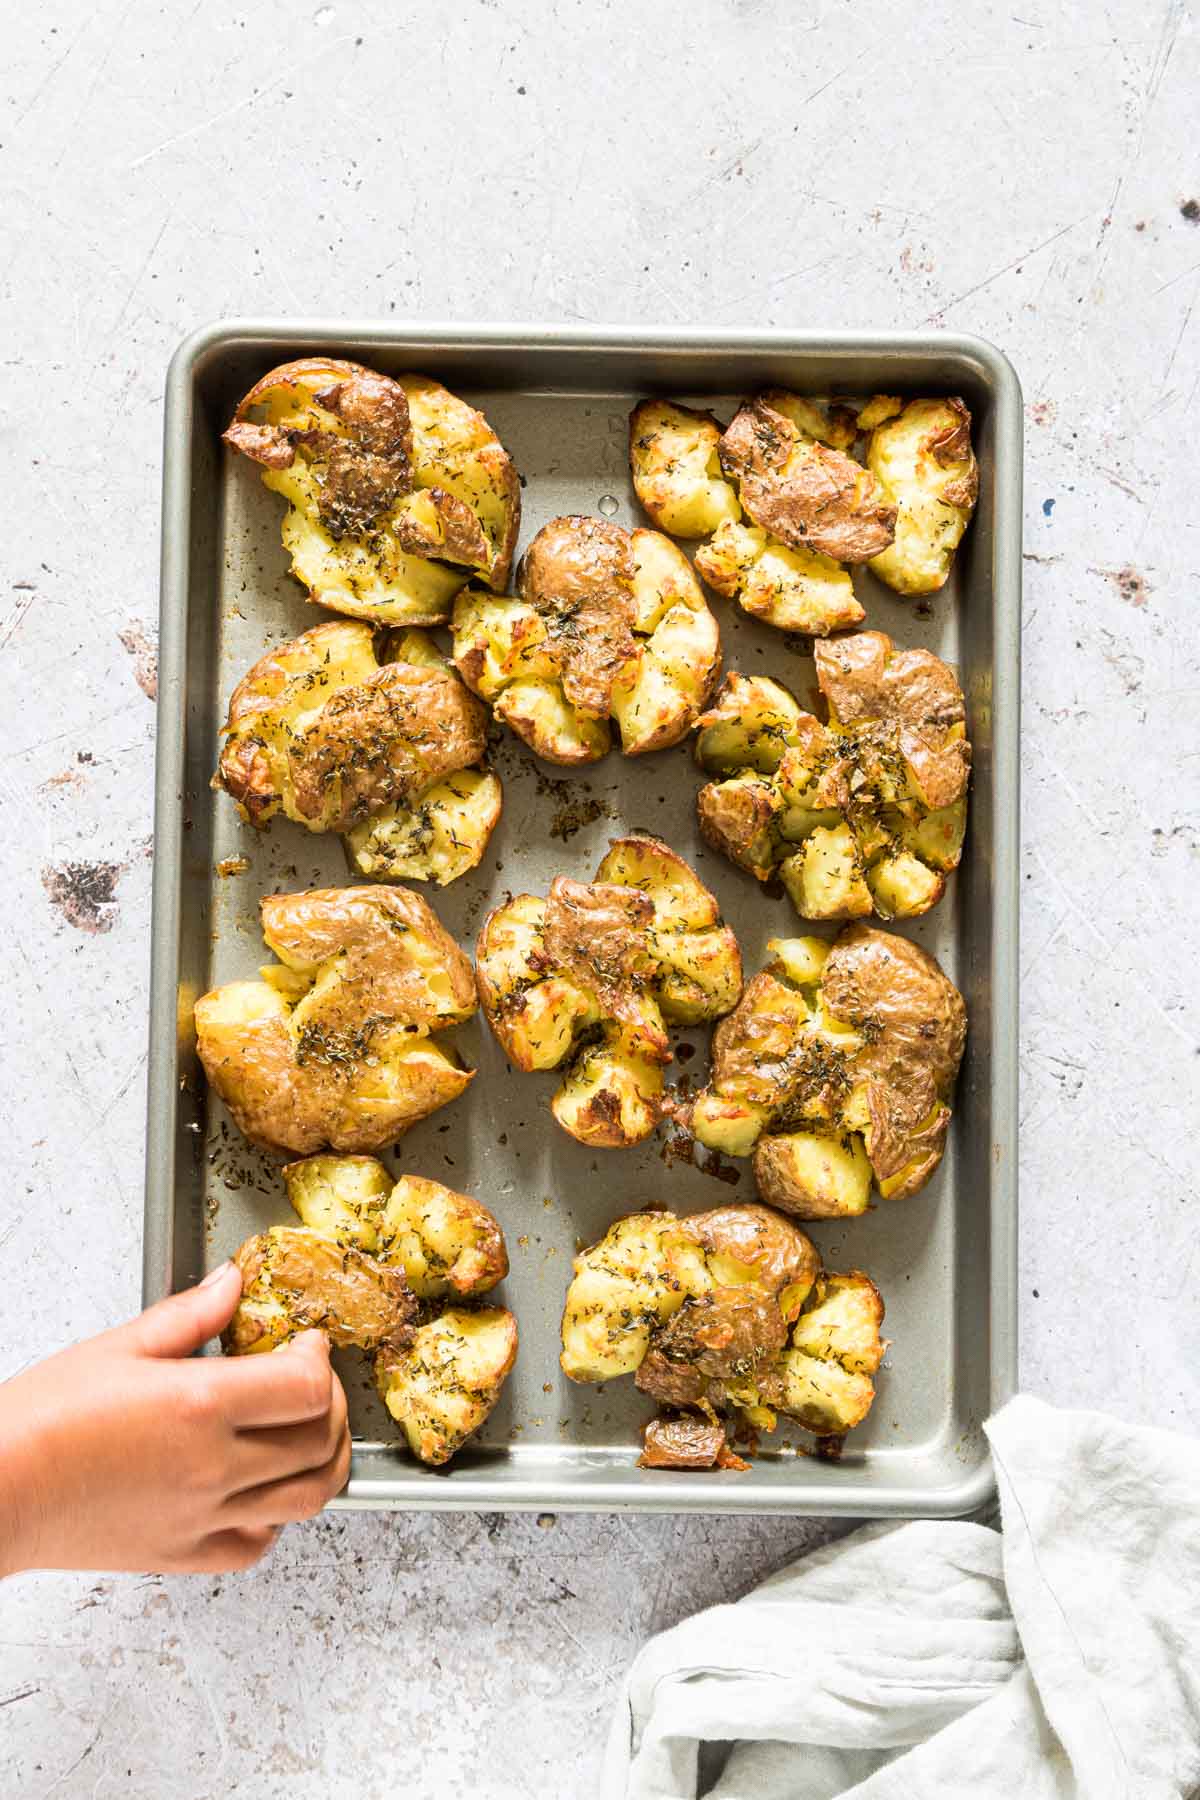 tray of cooked easy smashed potatoes with a hand reaching for one